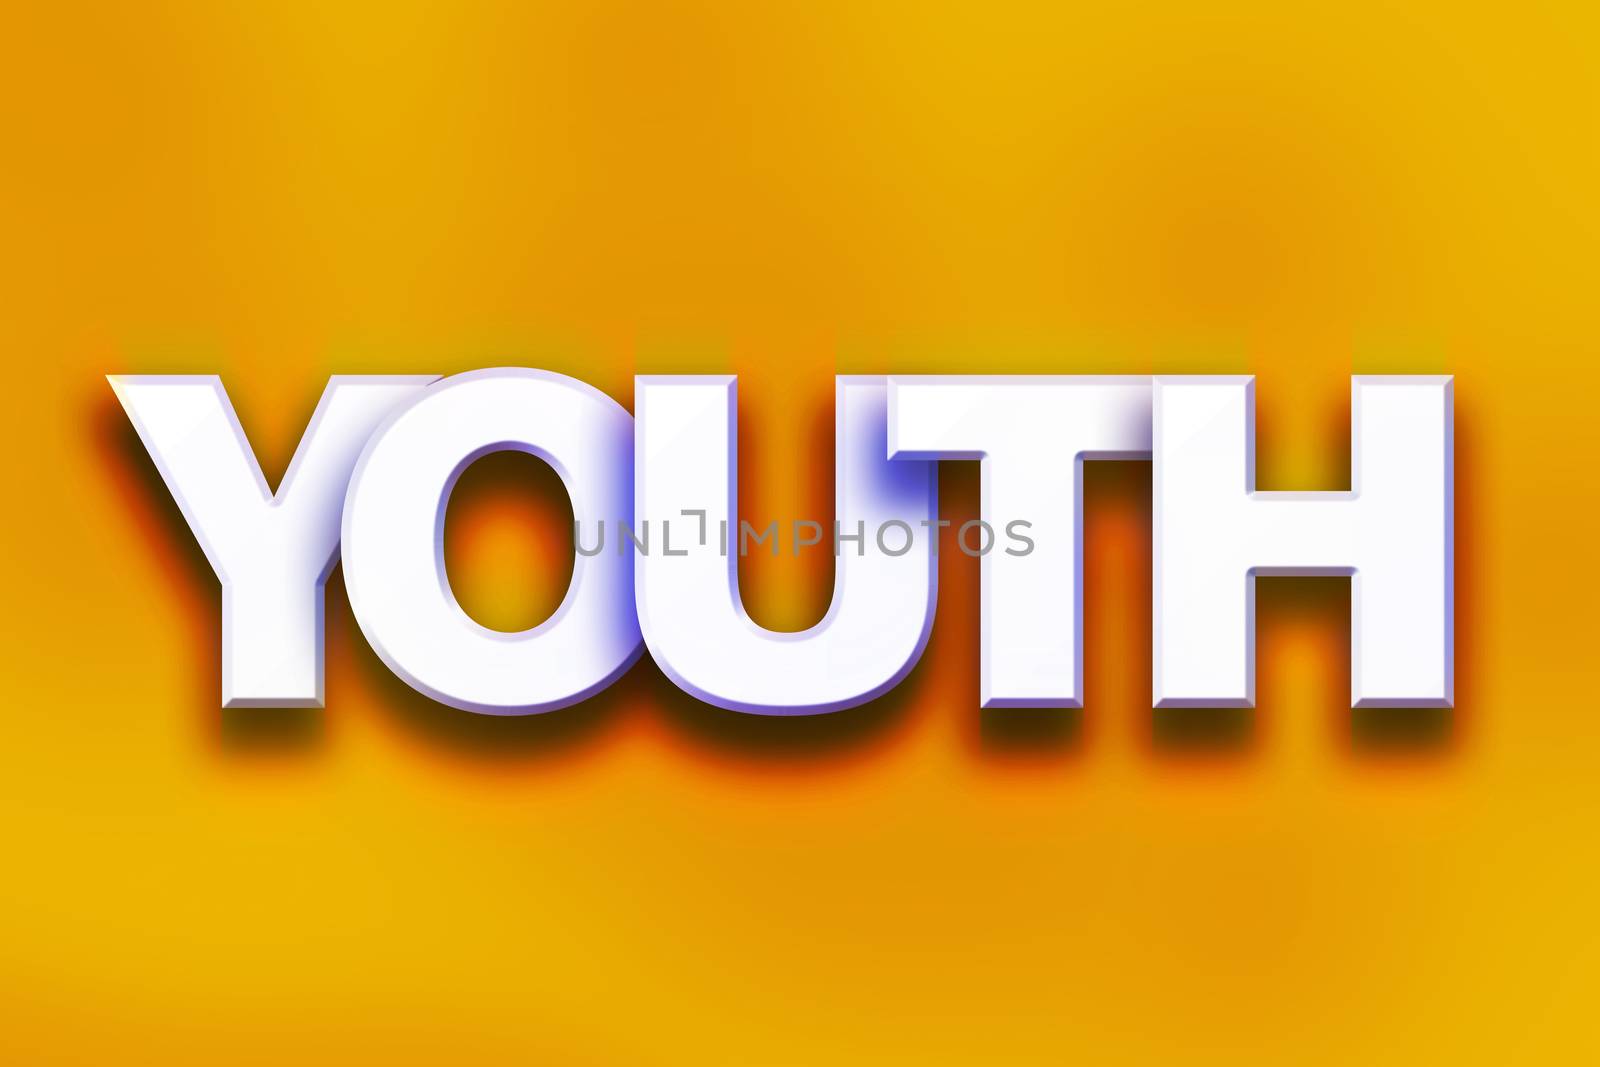 The word "Youth" written in white 3D letters on a colorful background concept and theme.